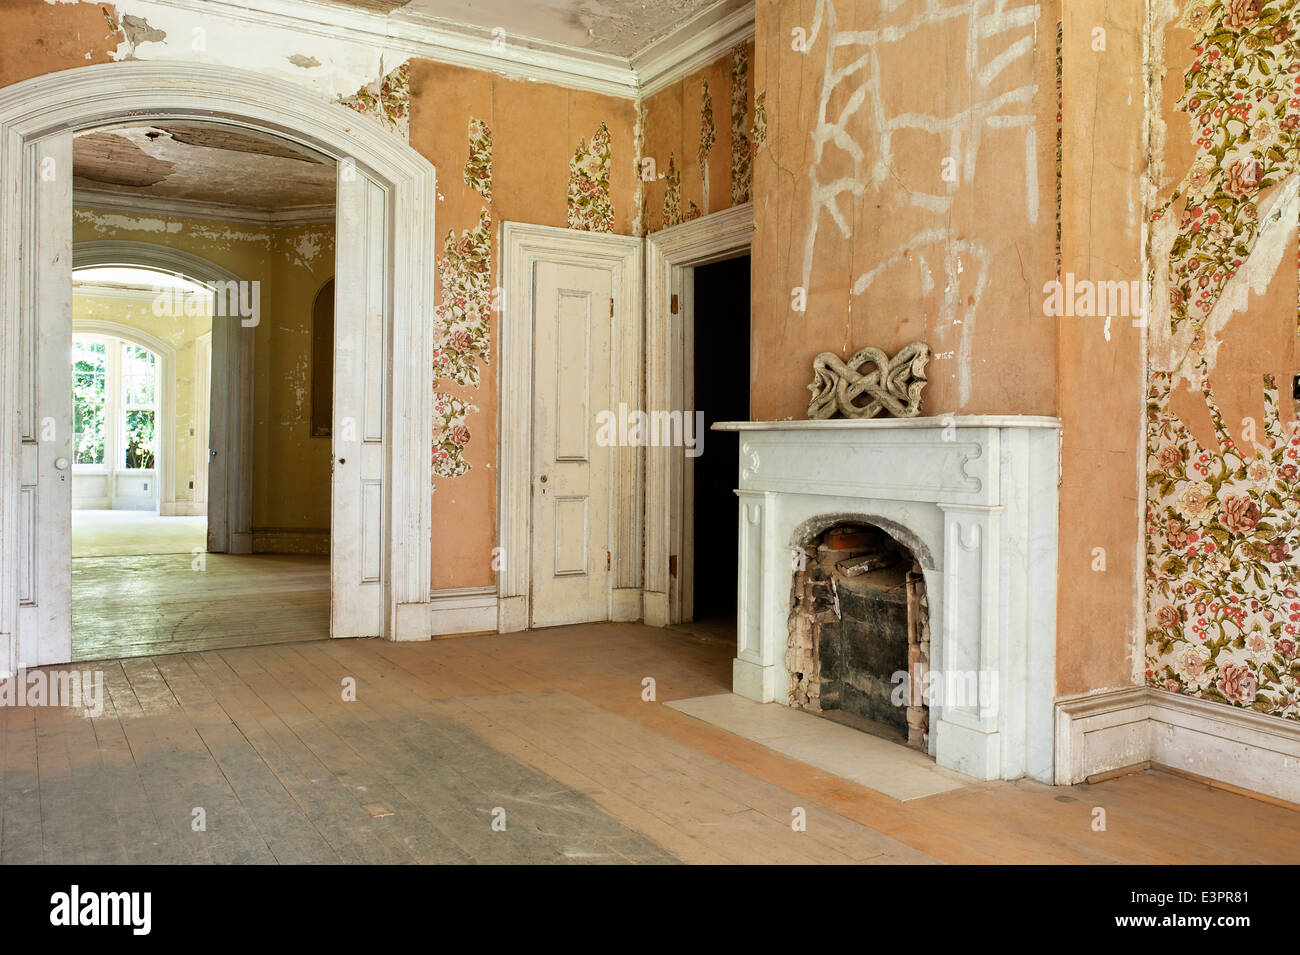 Old bricked up fireplace in empty room with peeling wallpaper and unsanded floors Stock Photo